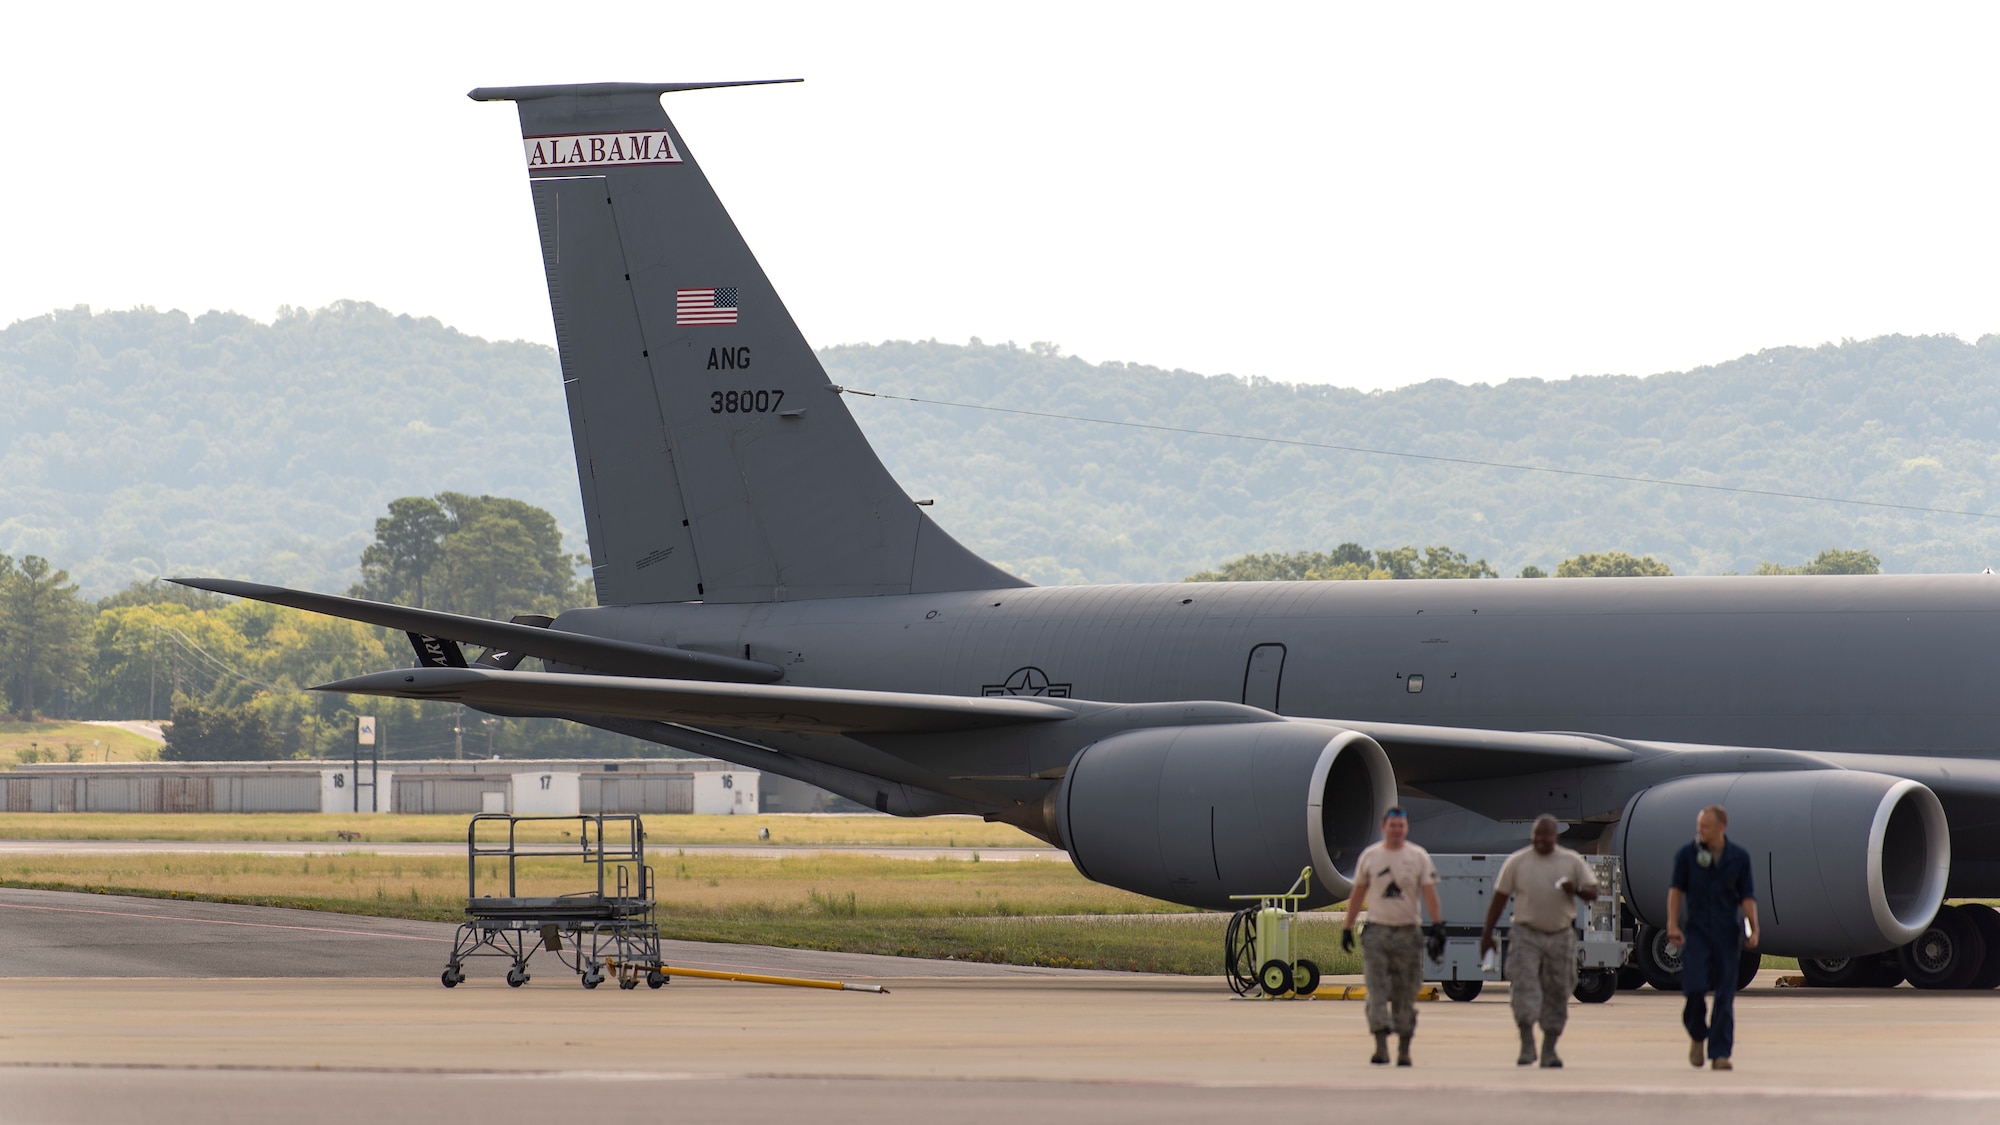 Airmen from the 99th Air Refueling Squadron walk away from a KC-135 Stratontanker aircraft after performing maintenance at Sumpter Smith Air National Guard Base, in Birmingham, Alabama, Aug. 28, 2018. The 99th ARS is a geographically separated unit that functions administratively under MacDill Air Force Base, Fla